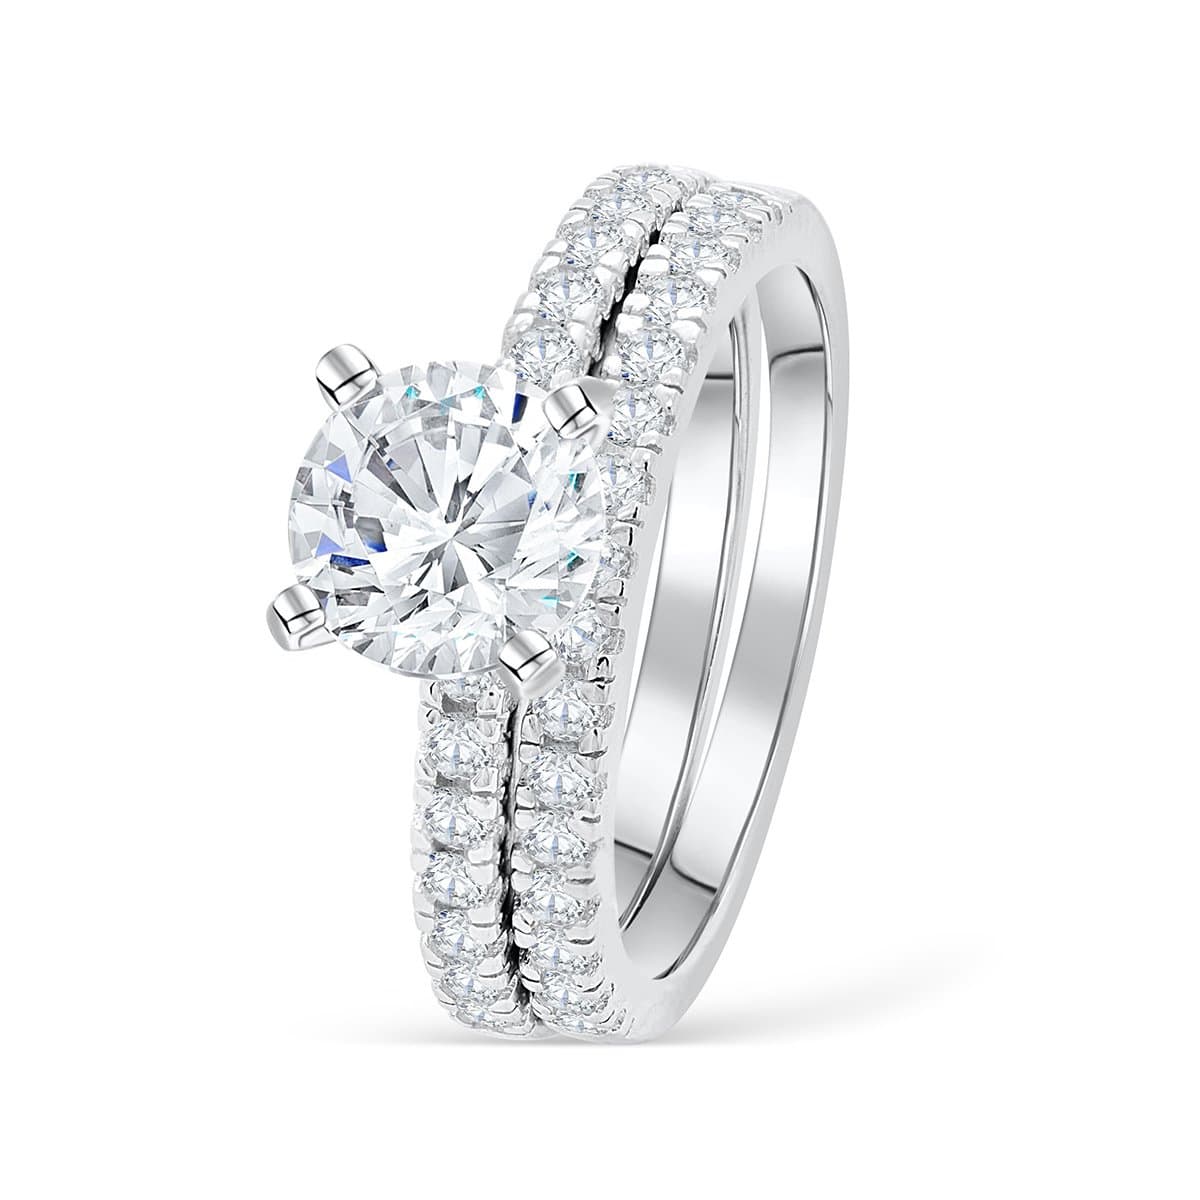 Do I Need a Ring Guard for My Engagement Ring? – Modern Gents